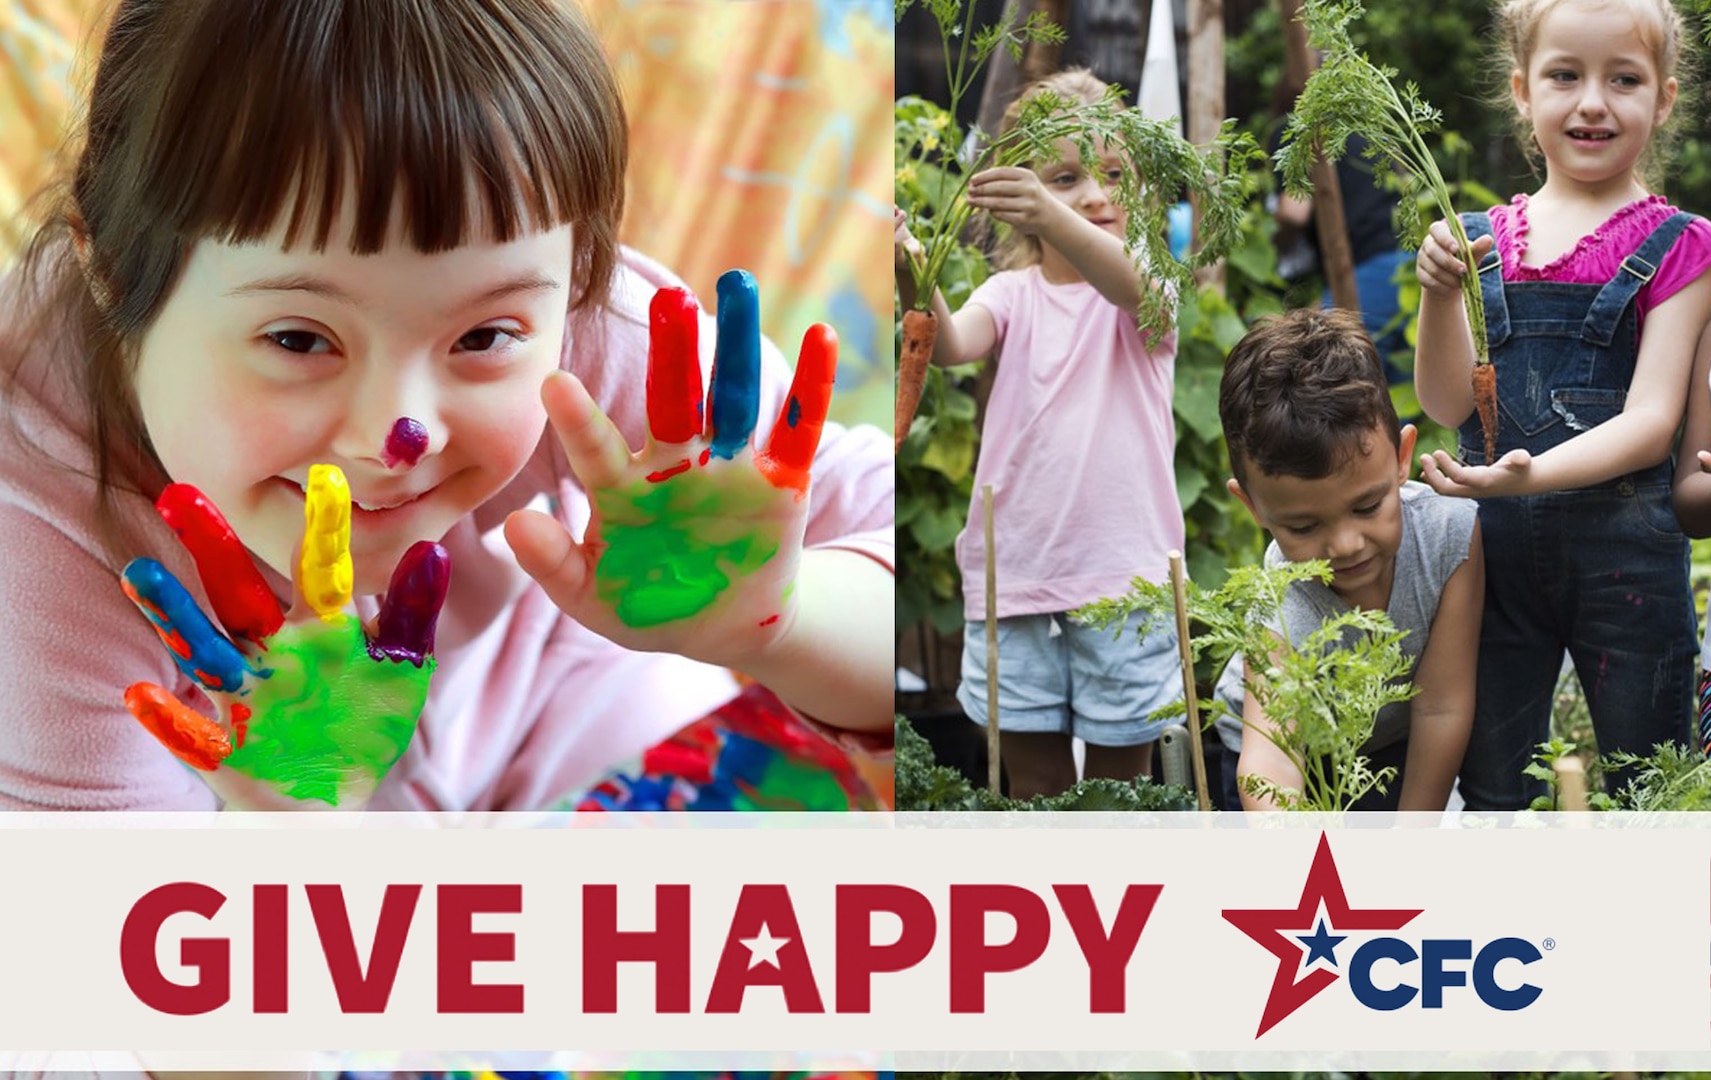 Two photos split down the middle, on the left is a special needs child with painted hands smiling and looking at the camera. On the right are three children engaged in planting some small plants. At the bottom the bold red text reads "Give Happy" and there is a logo at the bottom right along side the term "CFC"